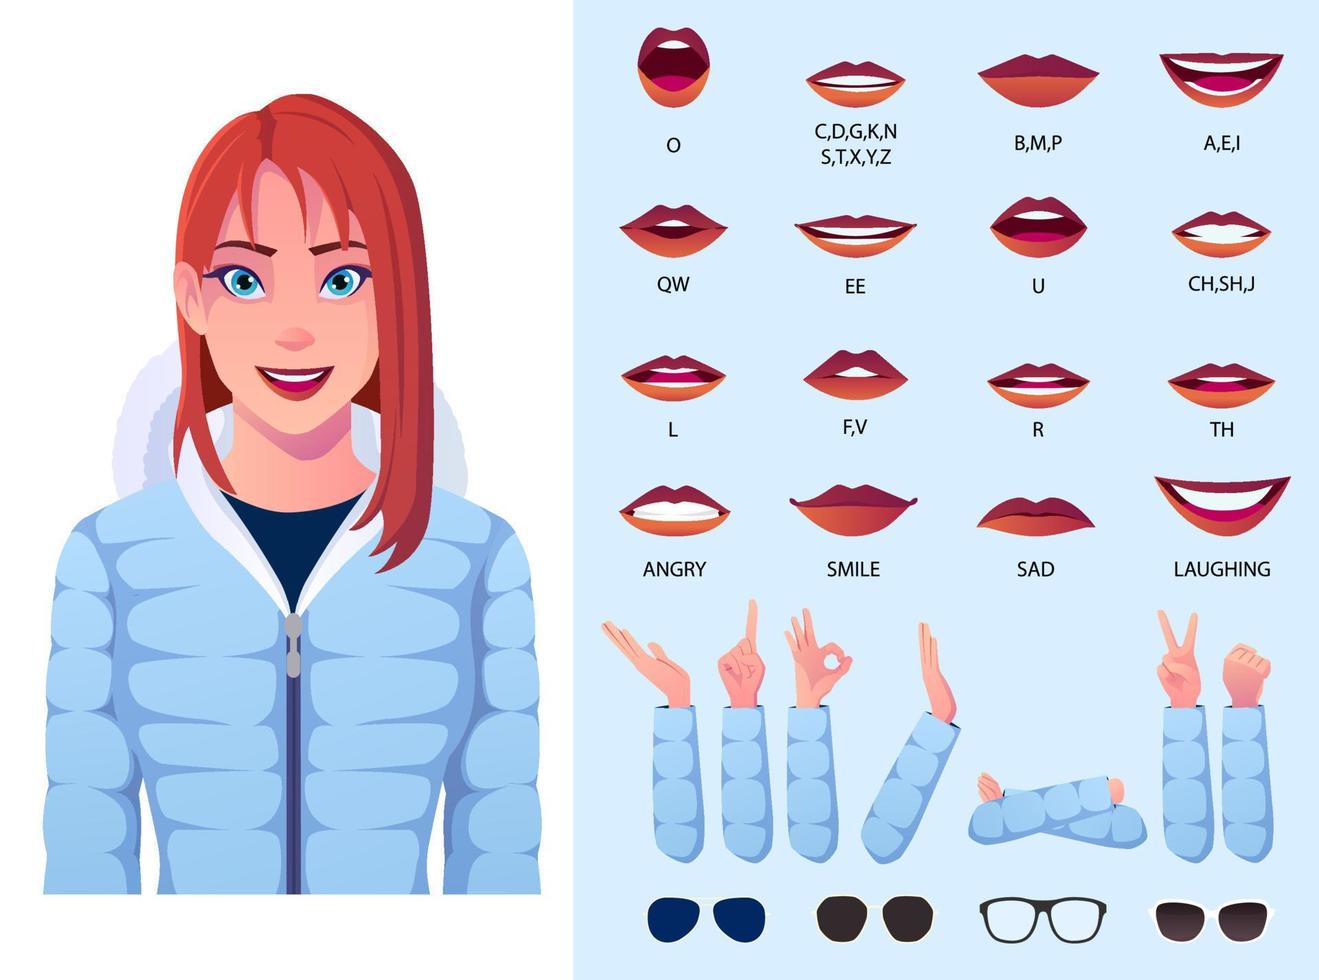 Mouth Animation Set with Woman Wearing Winter Jacket, Lip sync and Hand Gestures Illustration vector